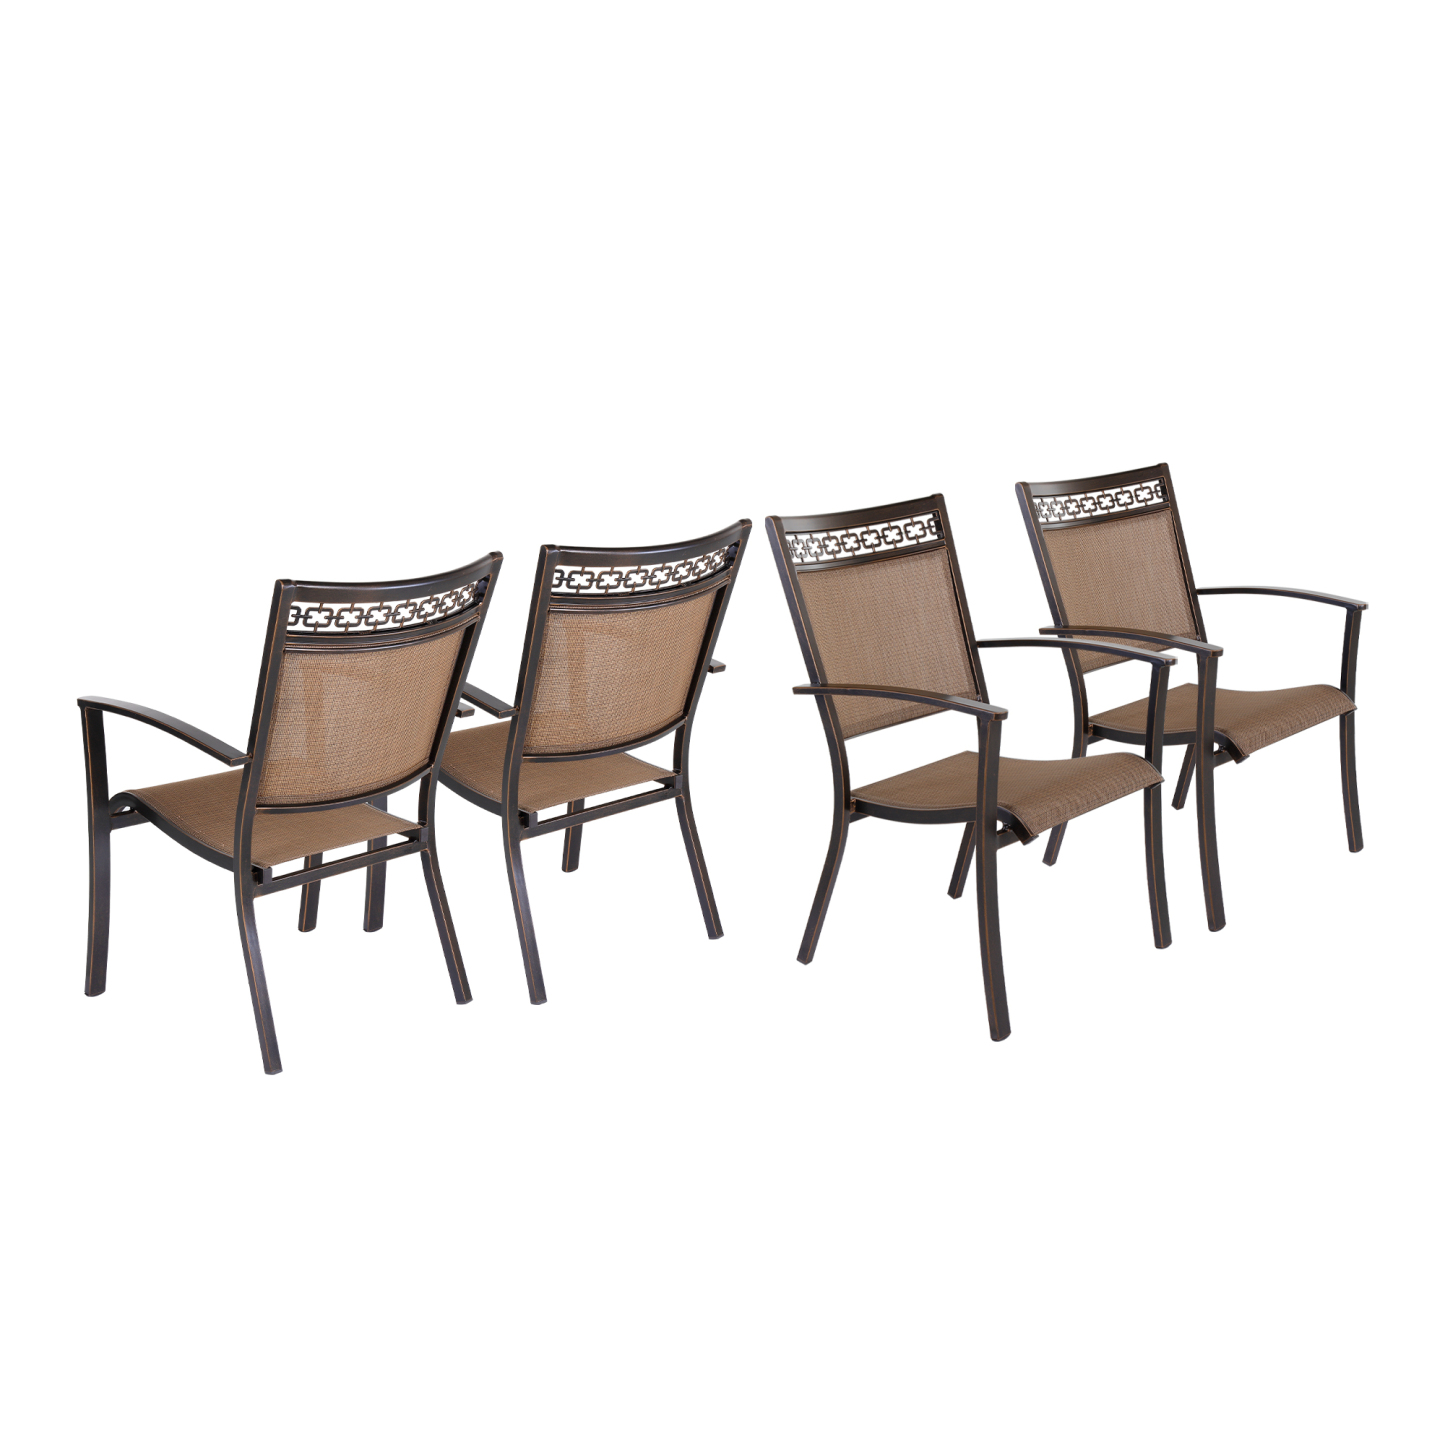 Mondawe 4-Pack Patio Chair Rust-Resistant Aluminum Outdoor Dining Chairs-Mondawe